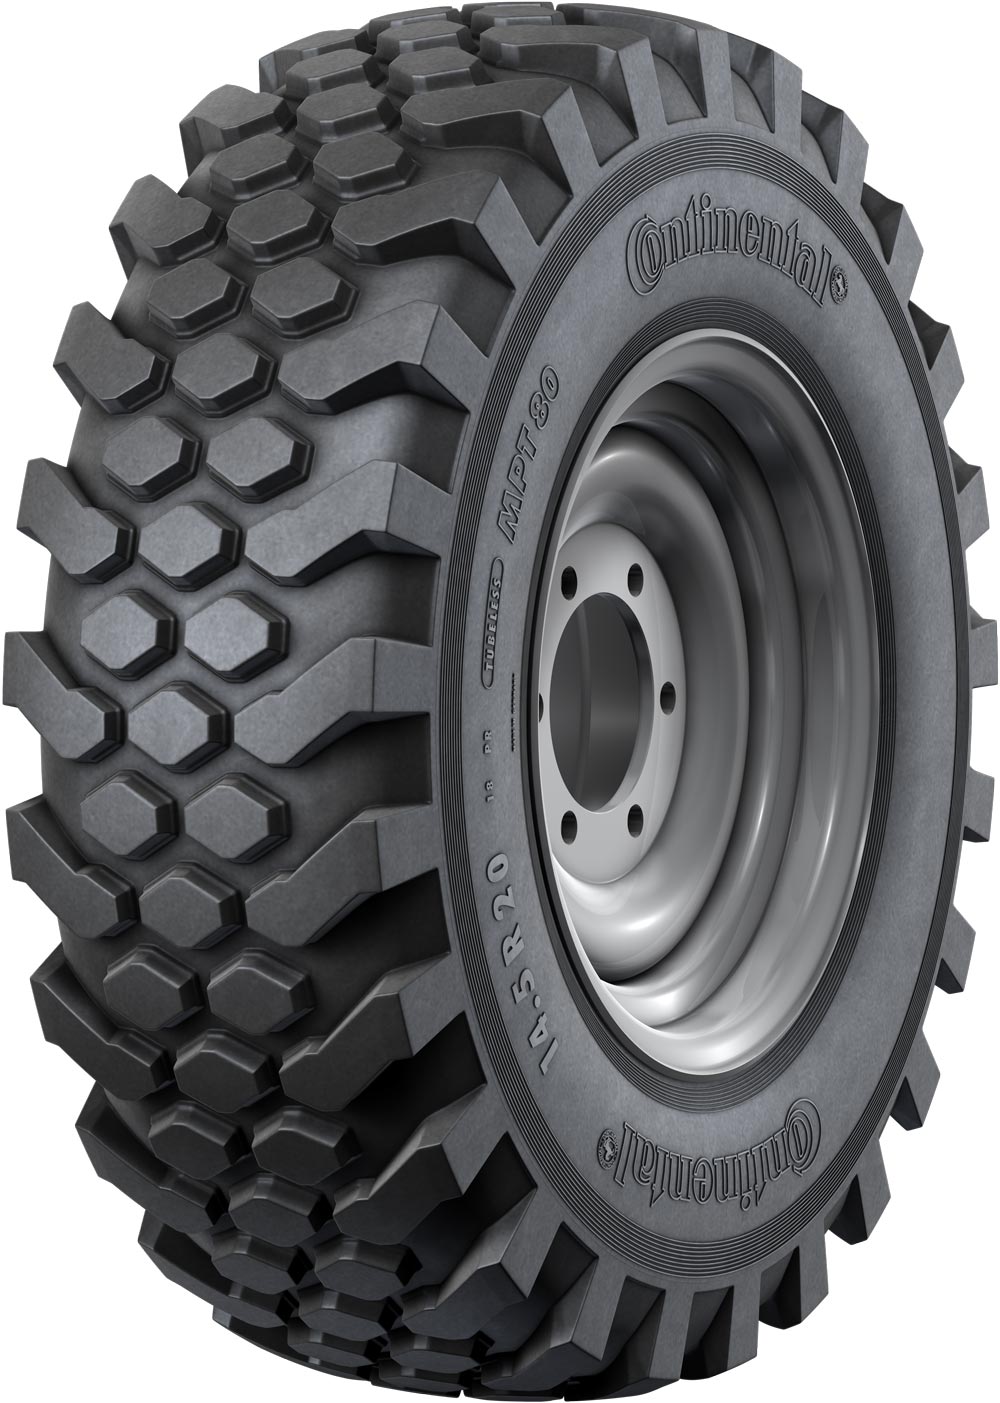 product_type-industrial_tires CONTINENTAL MPT80 22PR TL 12.5 R20 J